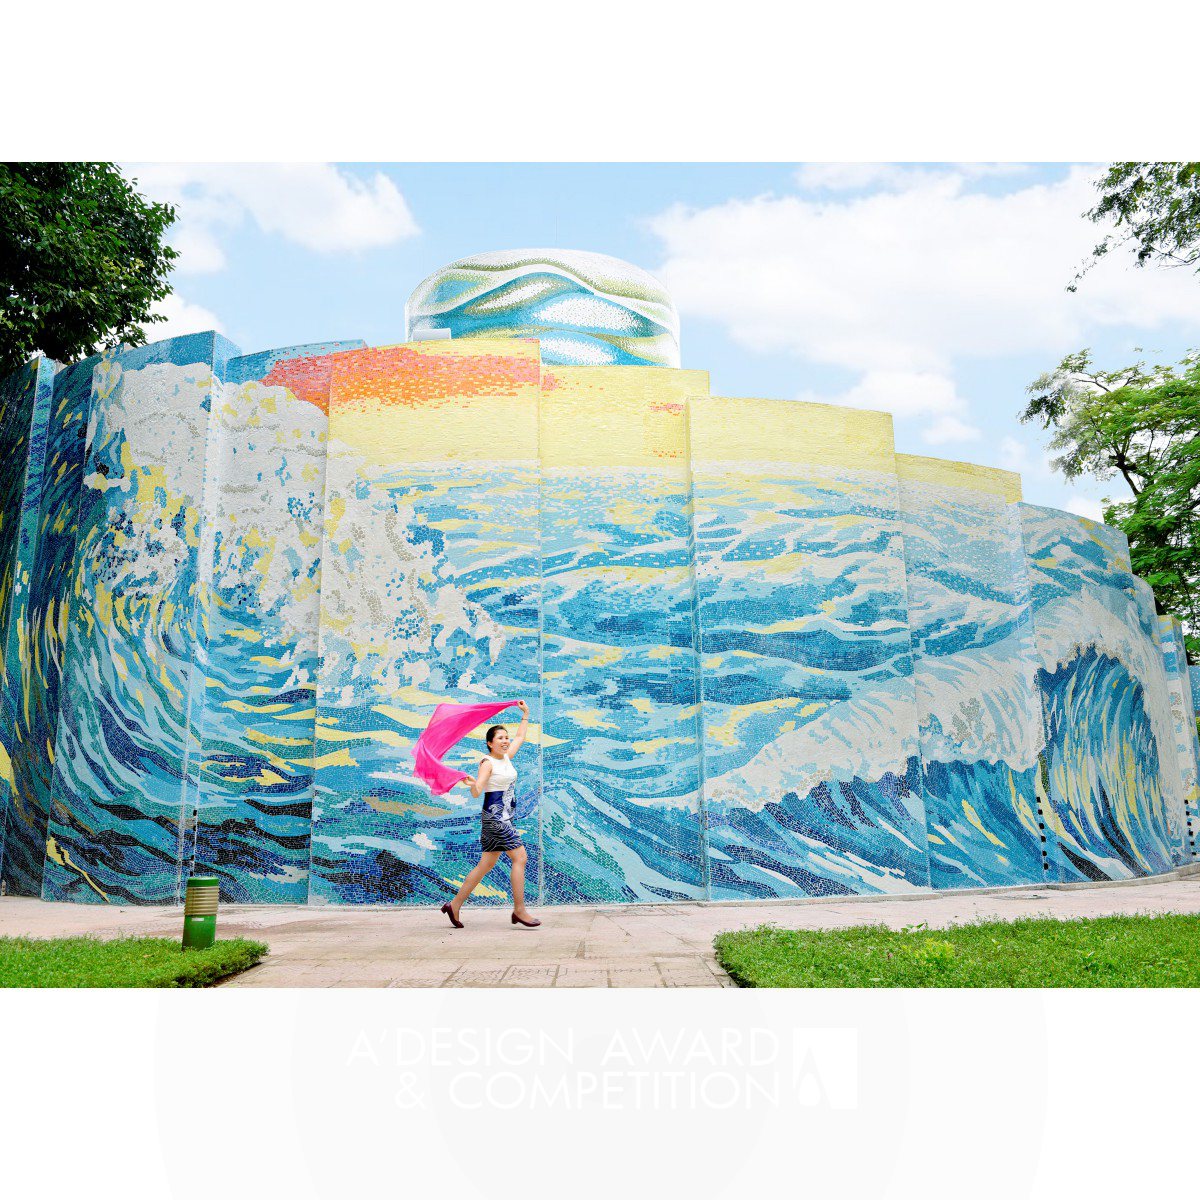 Wave Mural Public Artwork  by Nguyen Thi Thu Thuy